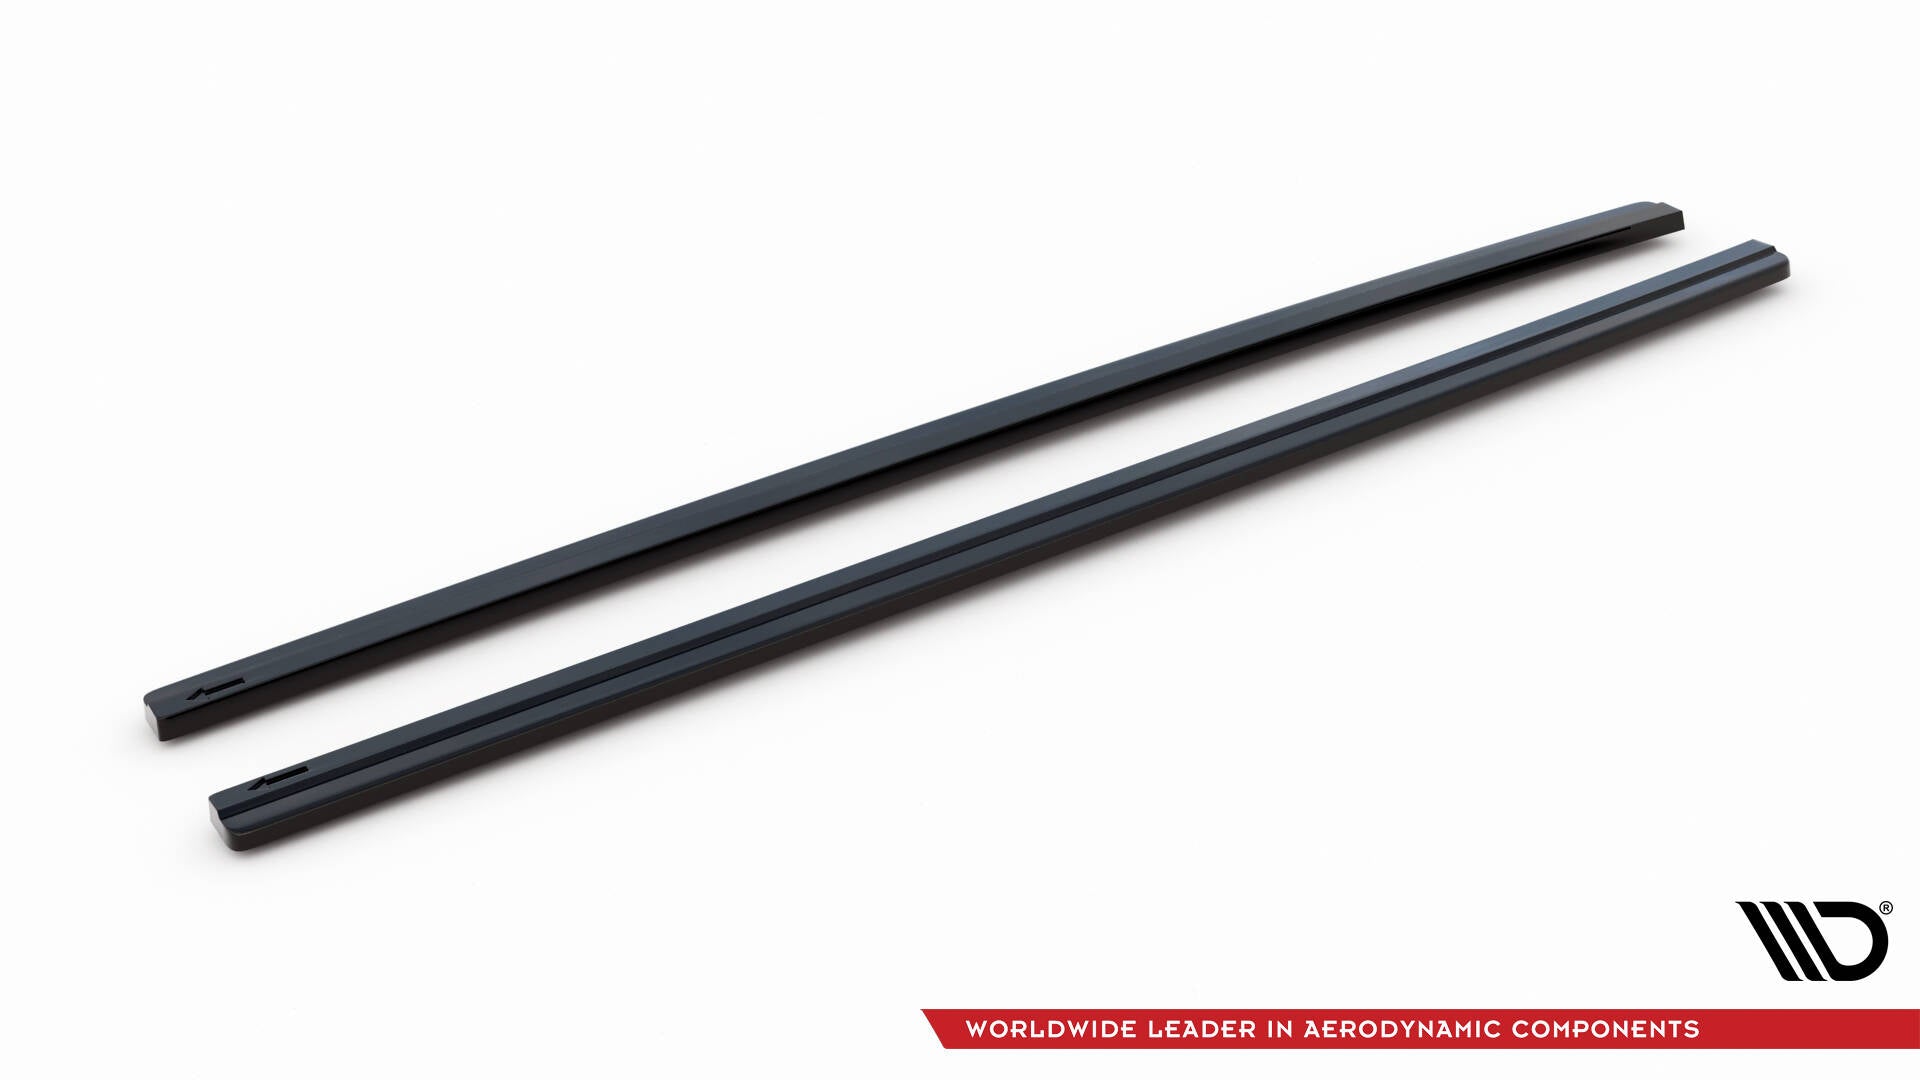 SIDE SKIRTS DIFFUSERS VW GOLF VII GTI PREFACE/FACELIFT (wide)